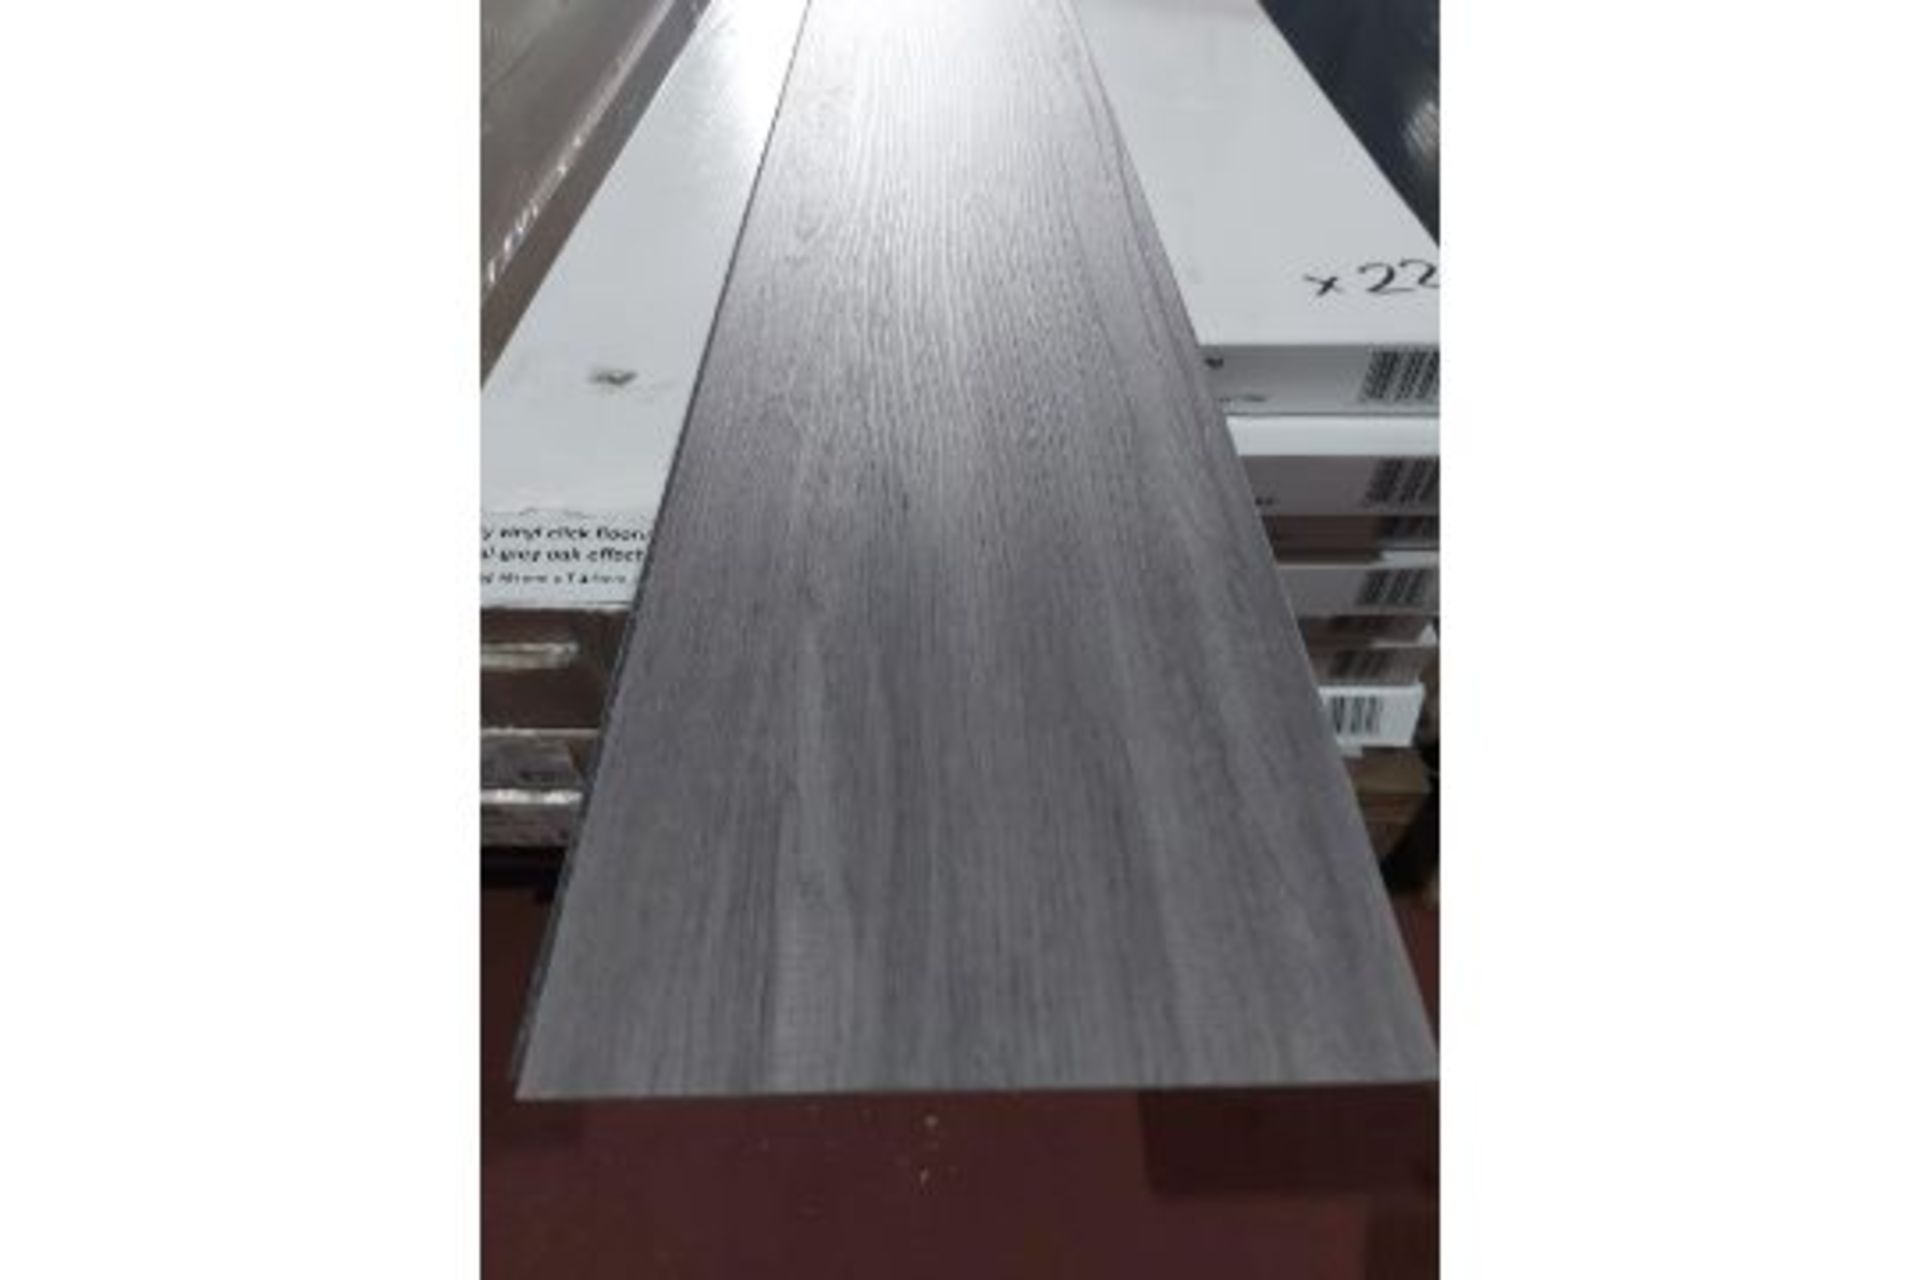 NEW PACKAGED 19.36m2 OF LUXURY NATURAL GREY OAK EFFECT CLICK FLOORING.